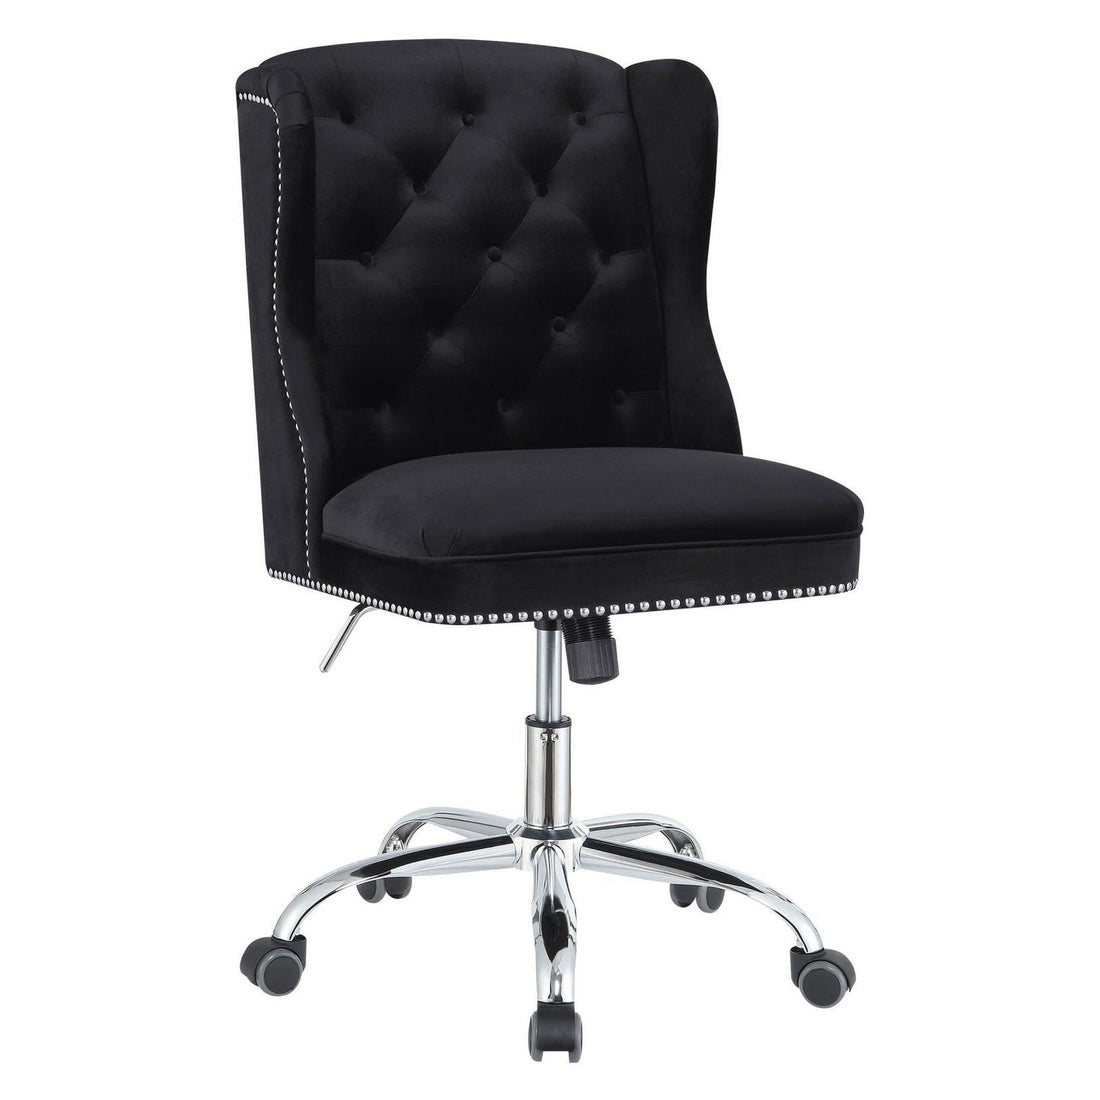 Julius Upholstered Tufted Office Chair Black and Chrome 801995